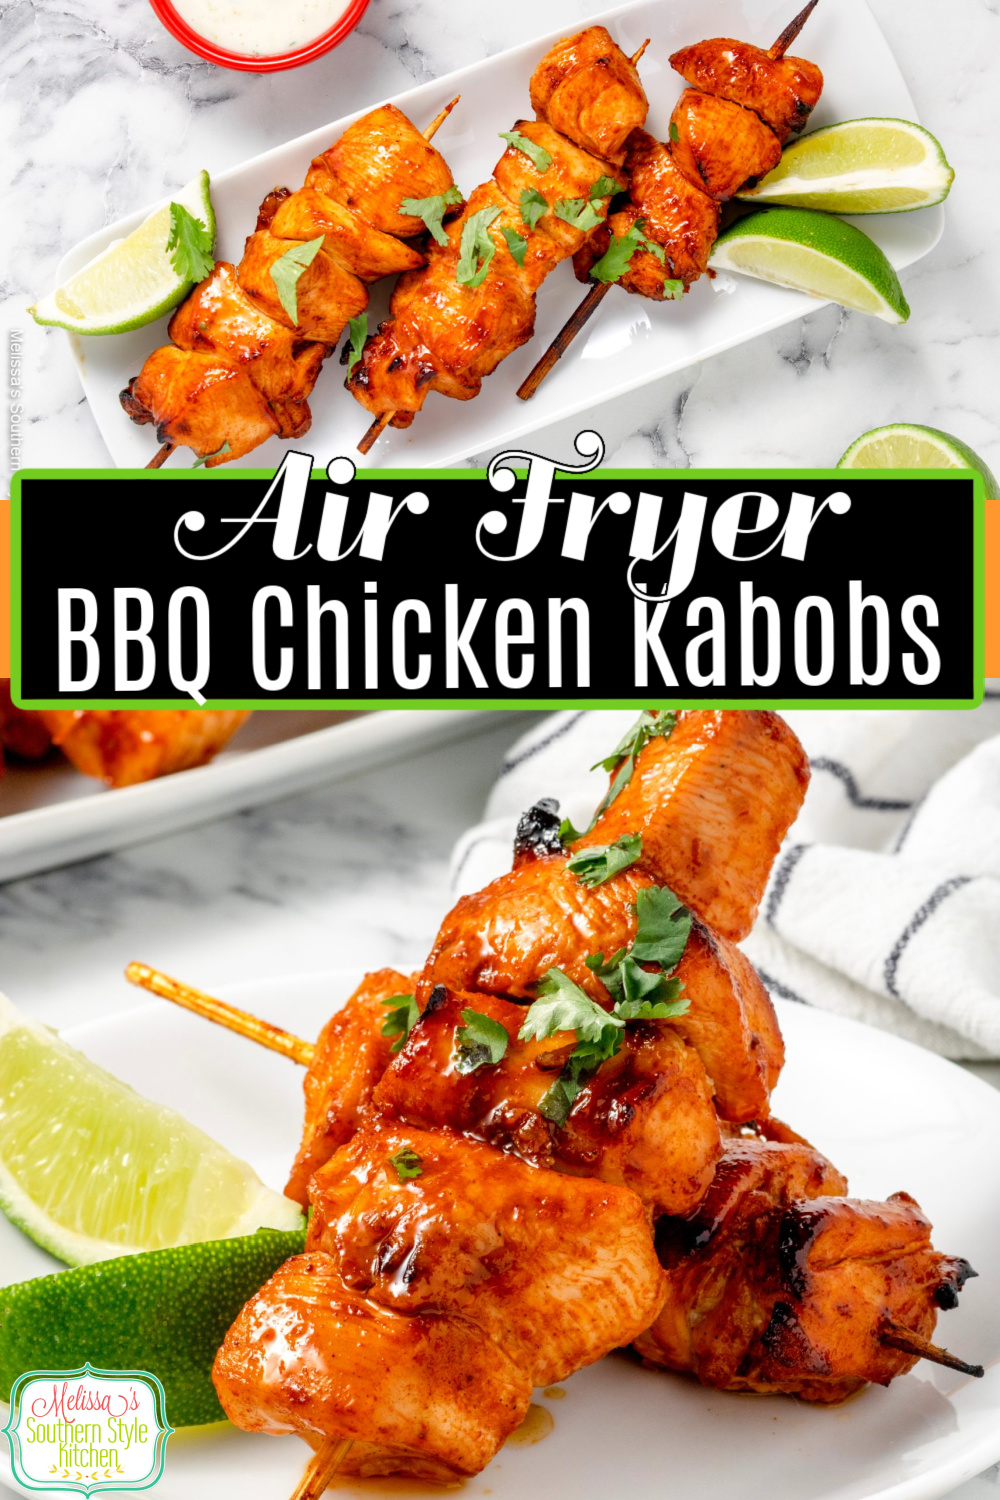 This recipe for juicy Air Fryer Barbecue Chicken Kabobs can be made in minutes with easy clean-up, too. Bonus grilling instructions included! #arifryerchicken #airfryerbarbecuechicken #barbecuechickenkabobs #grilledchicken #grilledbarbecuechicken #airfryerbarbecuechickenkabobs #easychickenrecipes #easychickenbreastrecipes via @melissasssk